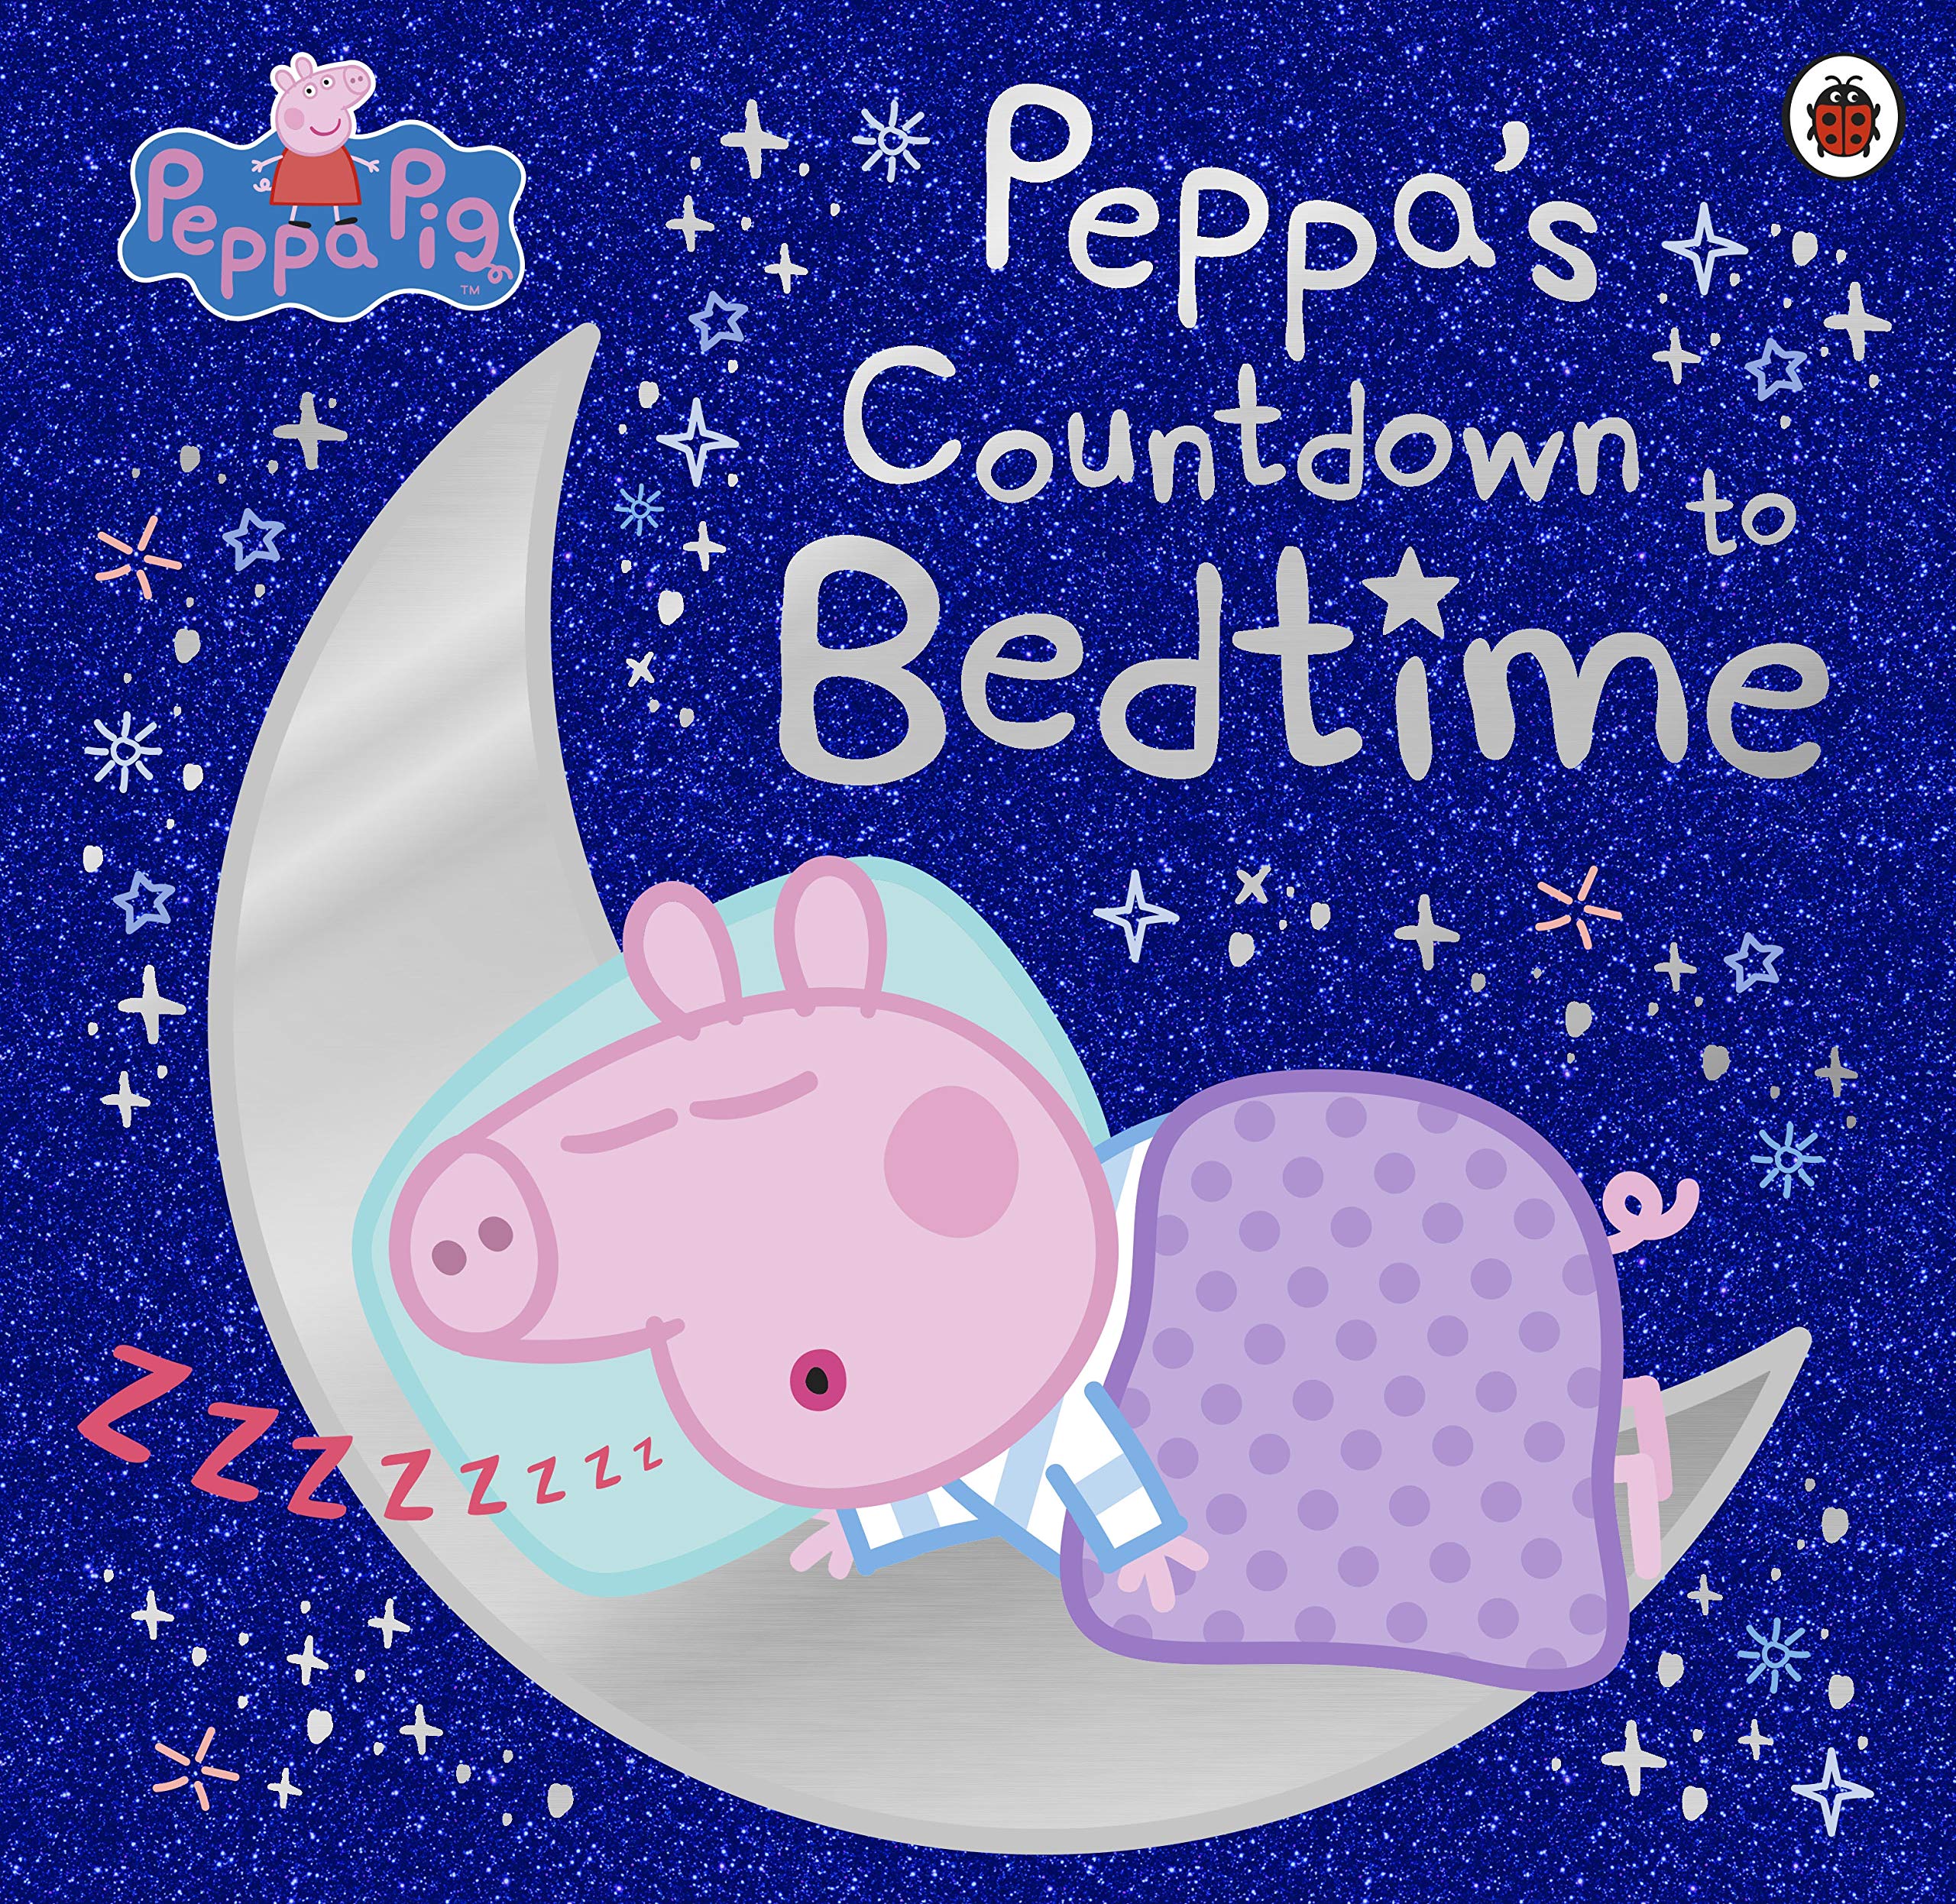 Peppa Pig: Counting Down to Bedtime | Peppa Pig